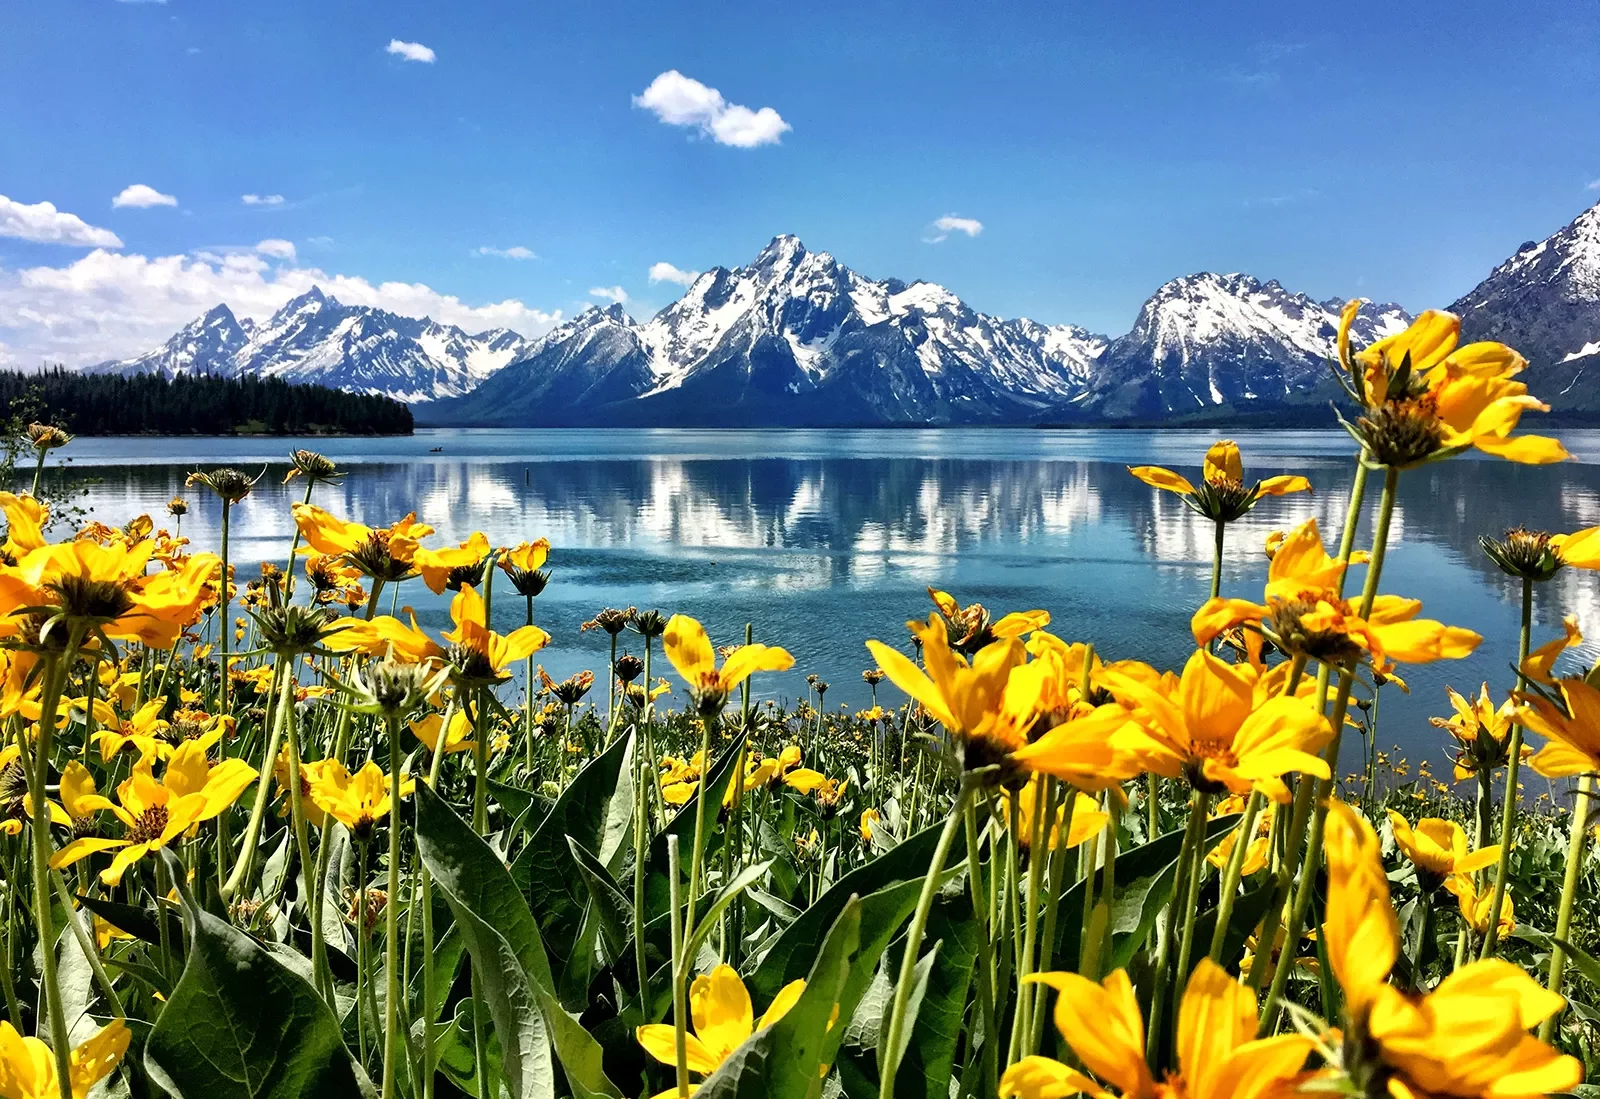 Yellow wild flowers, crystal blue water, and rocky mountains